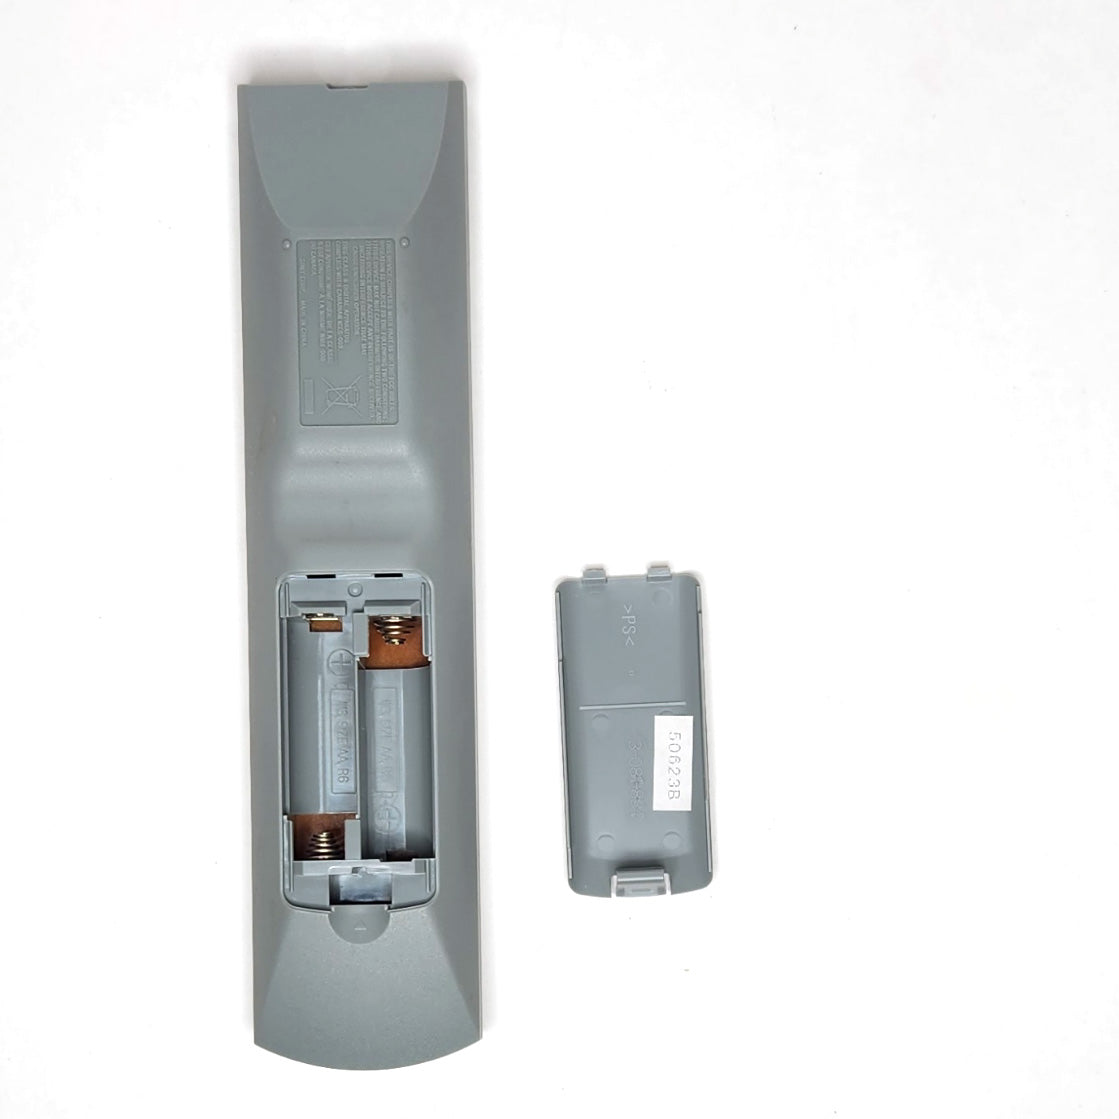 Sony RMT-D175A Remote Control for DVD Players - Battery Compartment